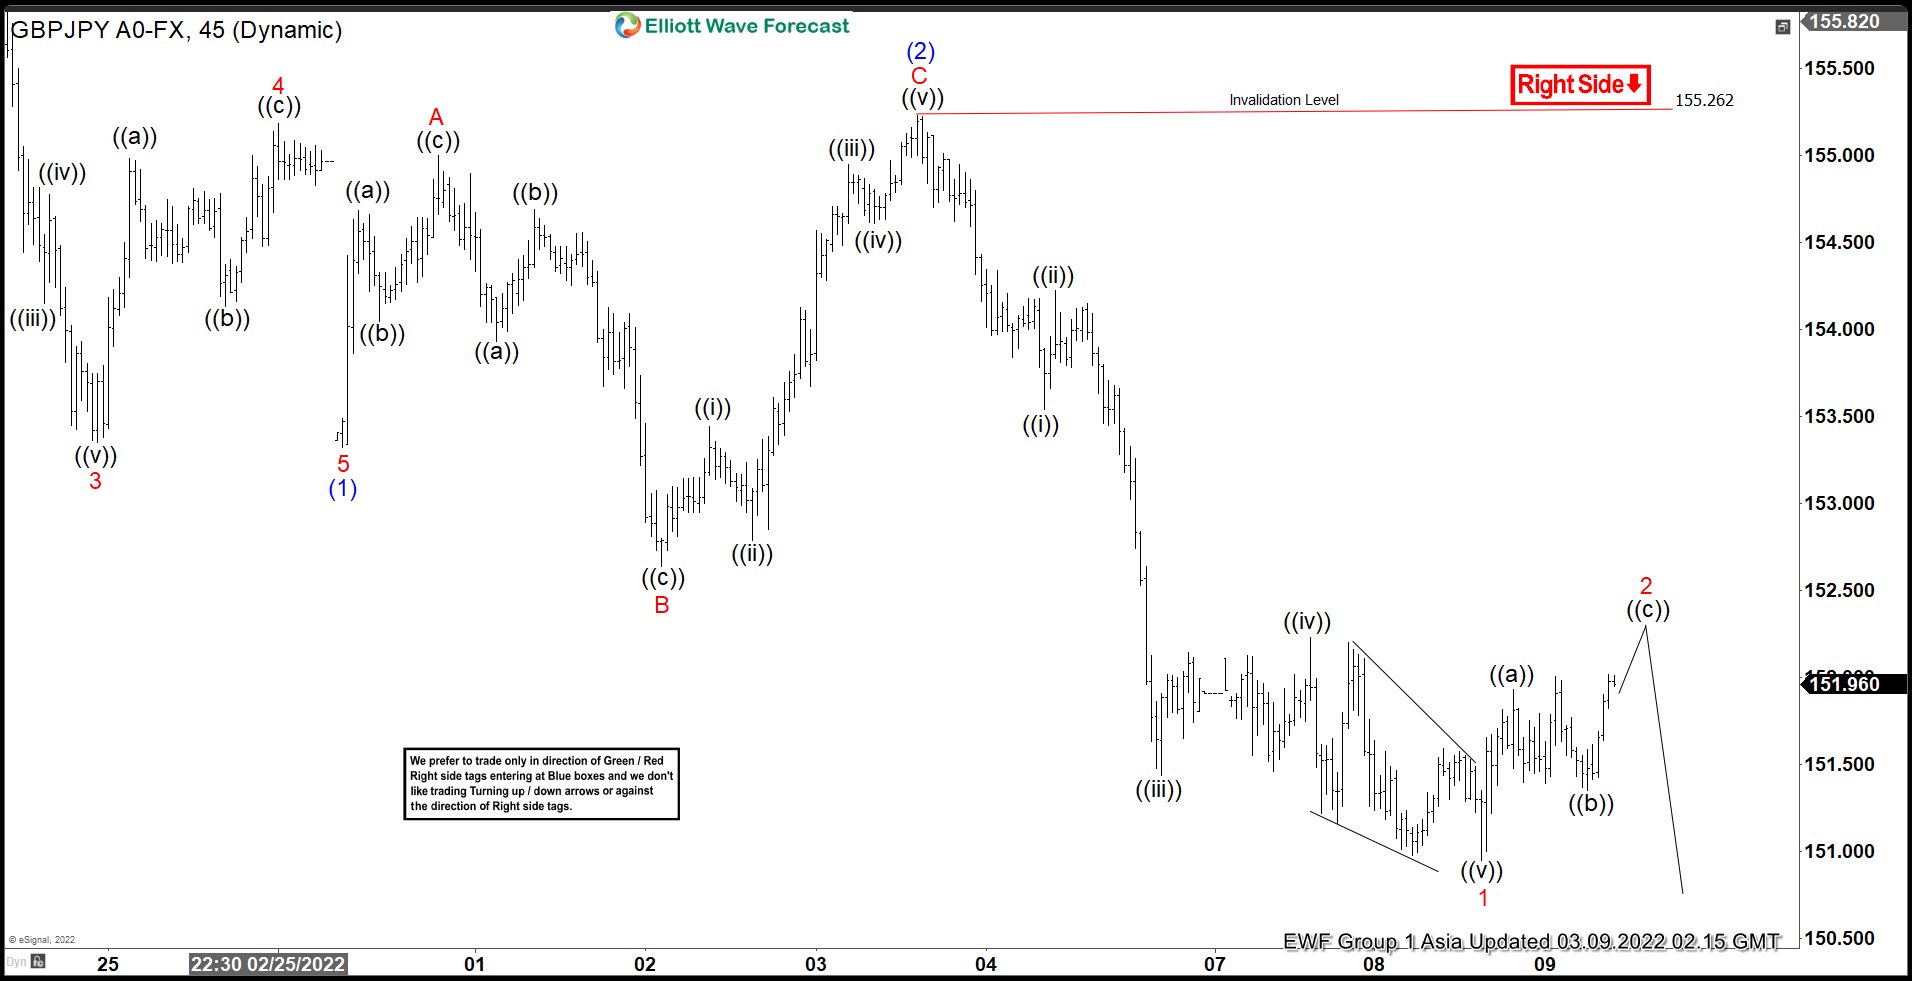 Elliott Wave View: GBPJPY Rally Expected to Fail